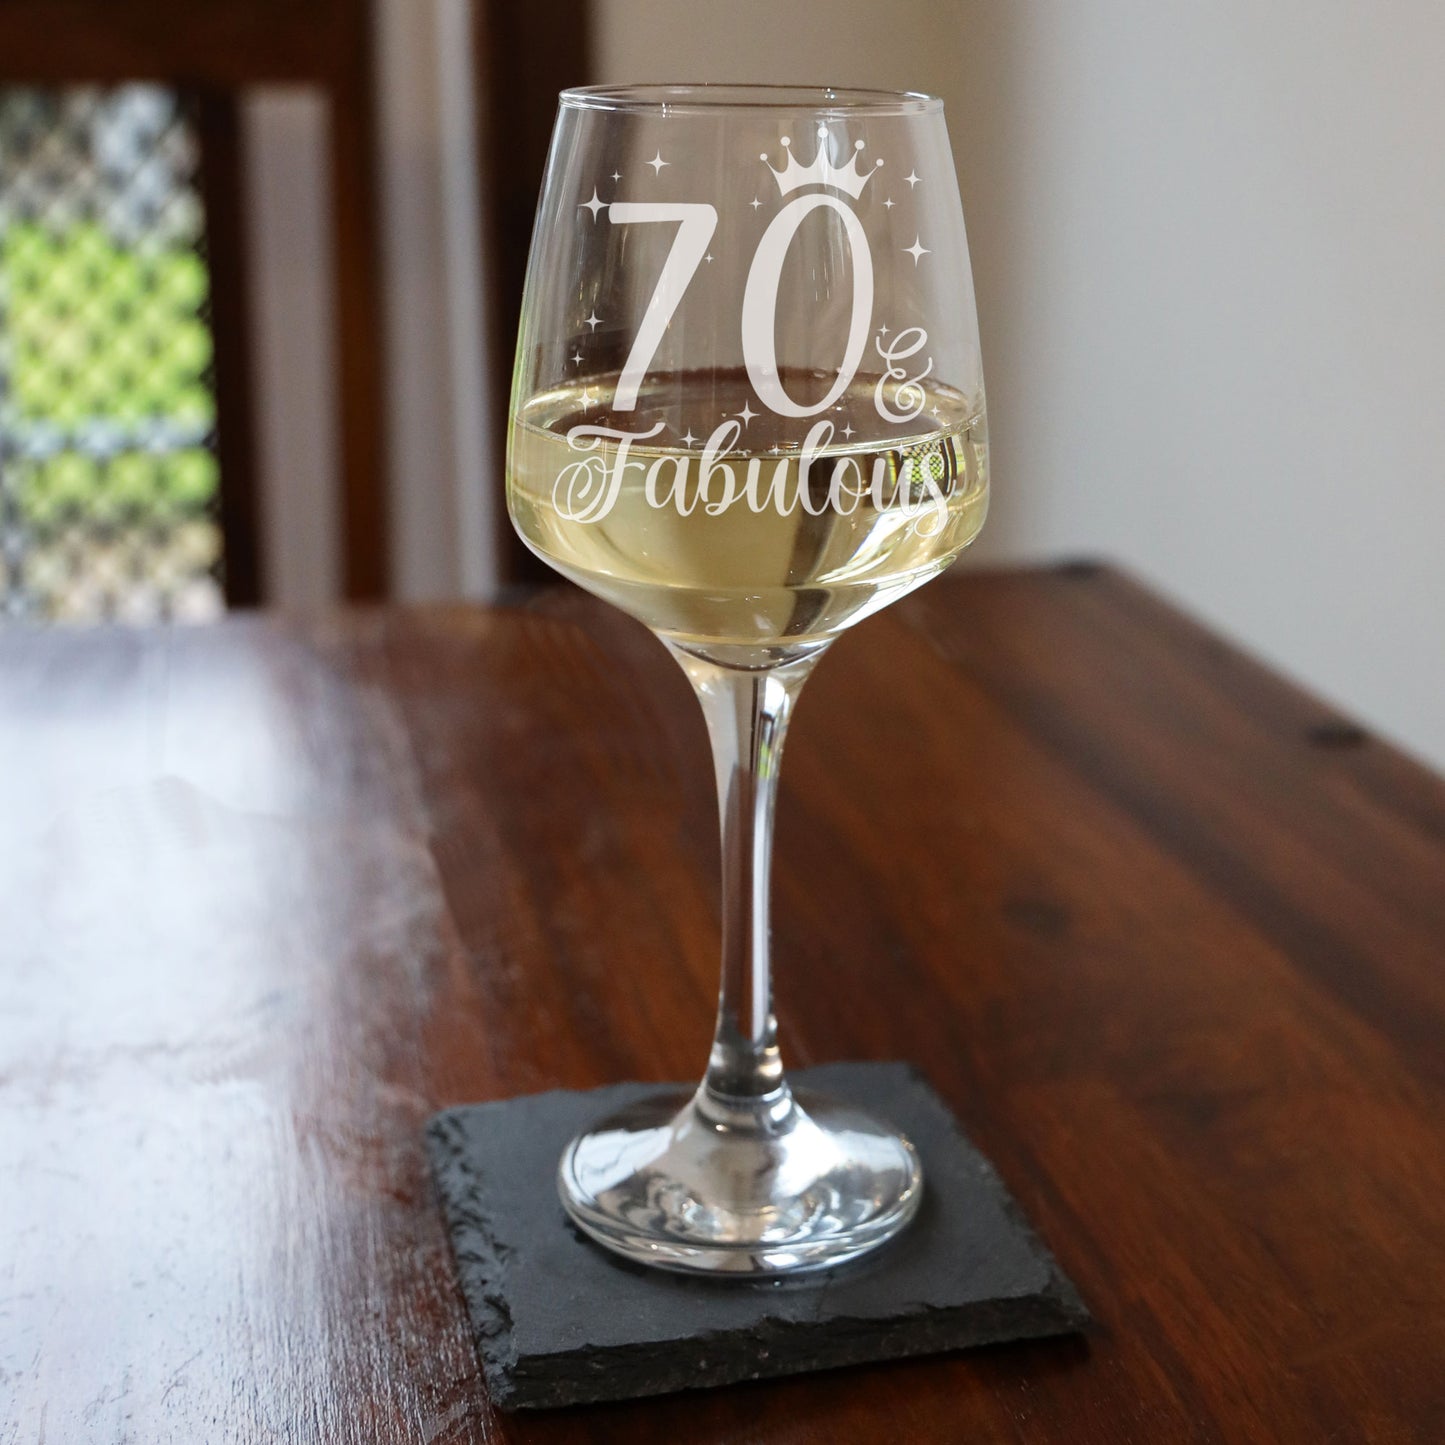 70 & Fabulous 70th Birthday Gift Engraved Wine Glass and/or Coaster Set  - Always Looking Good - Wine Glass Only  